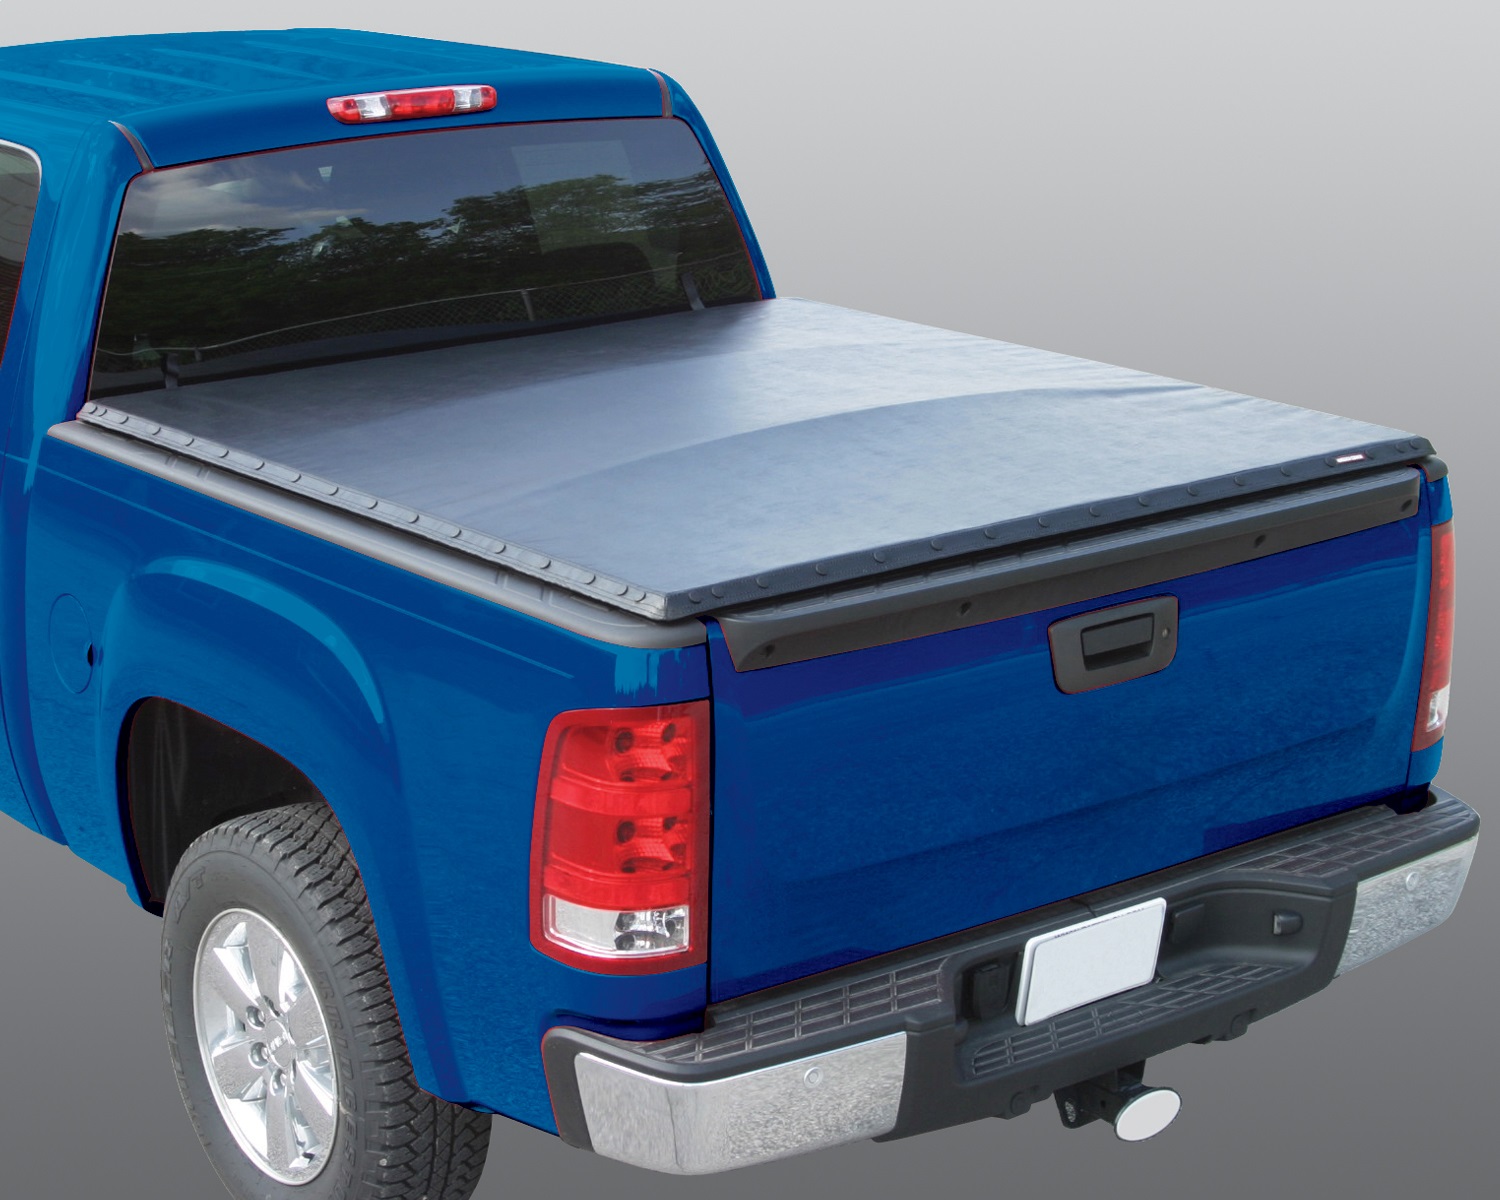 Rugged Liner Rugged Liner SN-F804 Rugged Cover; Tonneau Cover Fits 97-08 F-150 F-150 Heritage